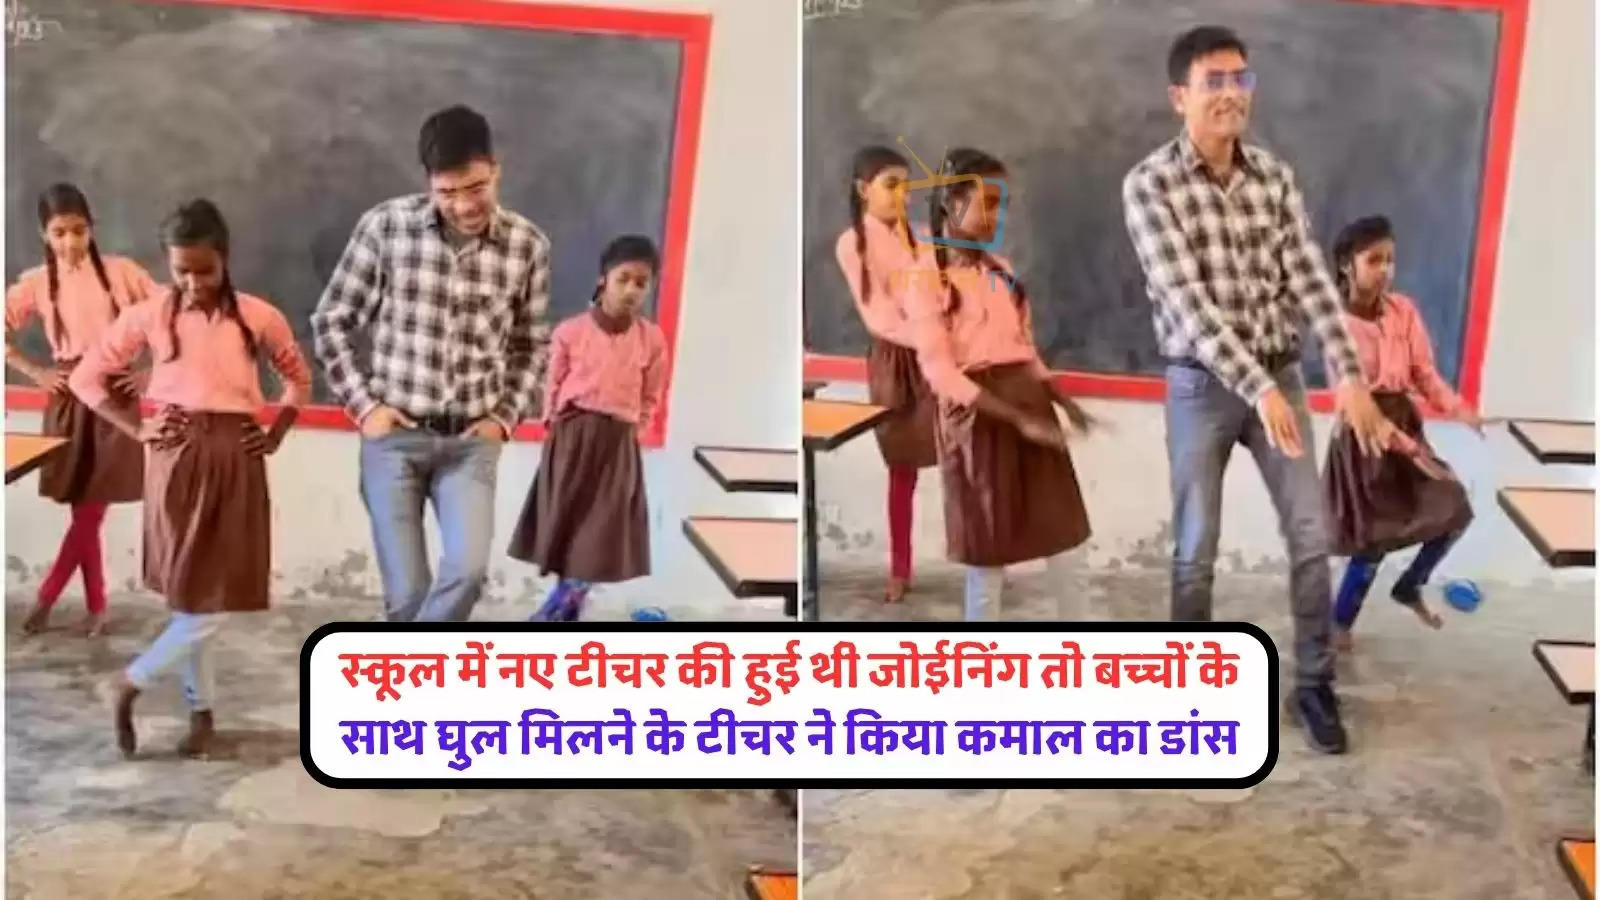 teacher-did-an-amazing-dance-with-children-video-of-them-doing-similar-steps-